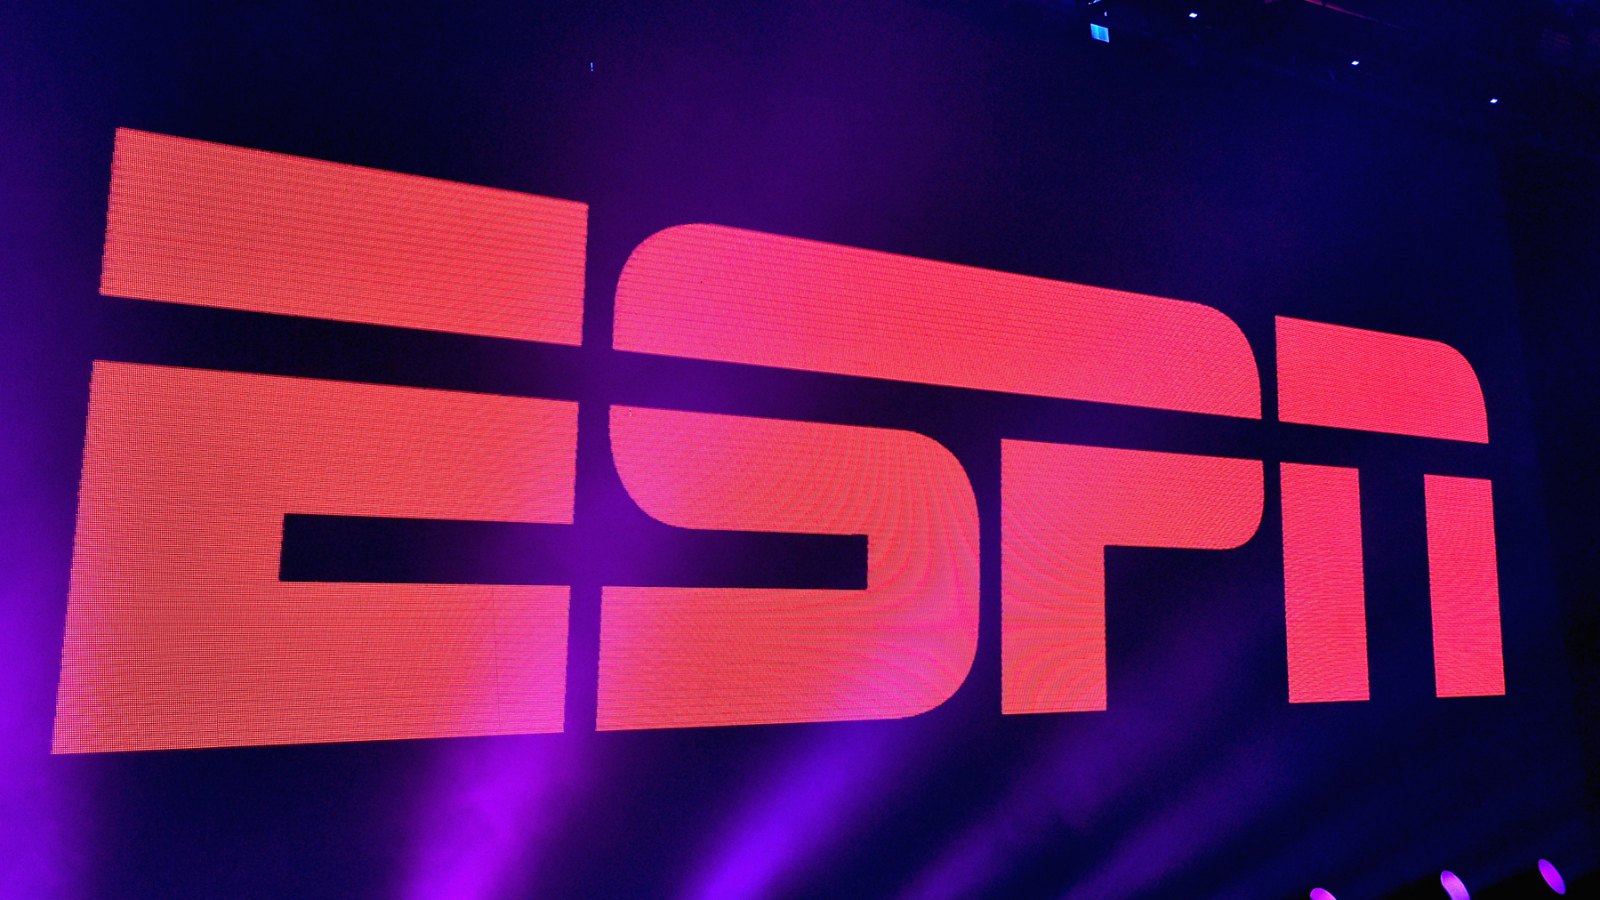 ESPN logo during ESPN The Party in San Francisco on February 5, 2016.